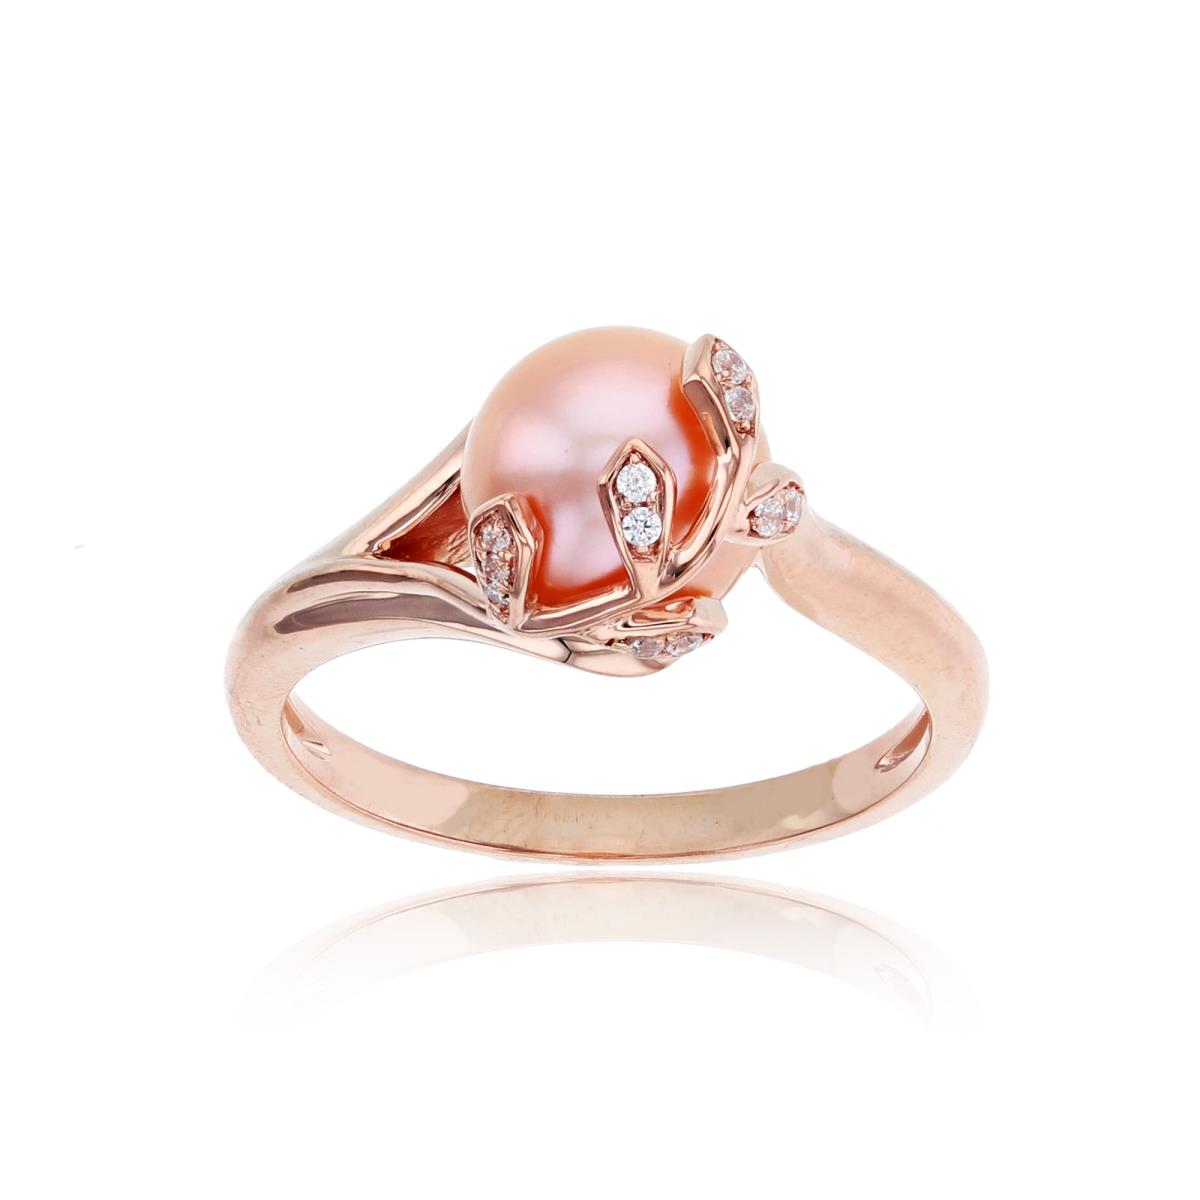 10K Rose Gold 0.05 CTTW Rnd Diam & 8mm Rnd Pink Pearl with Leaves Ring